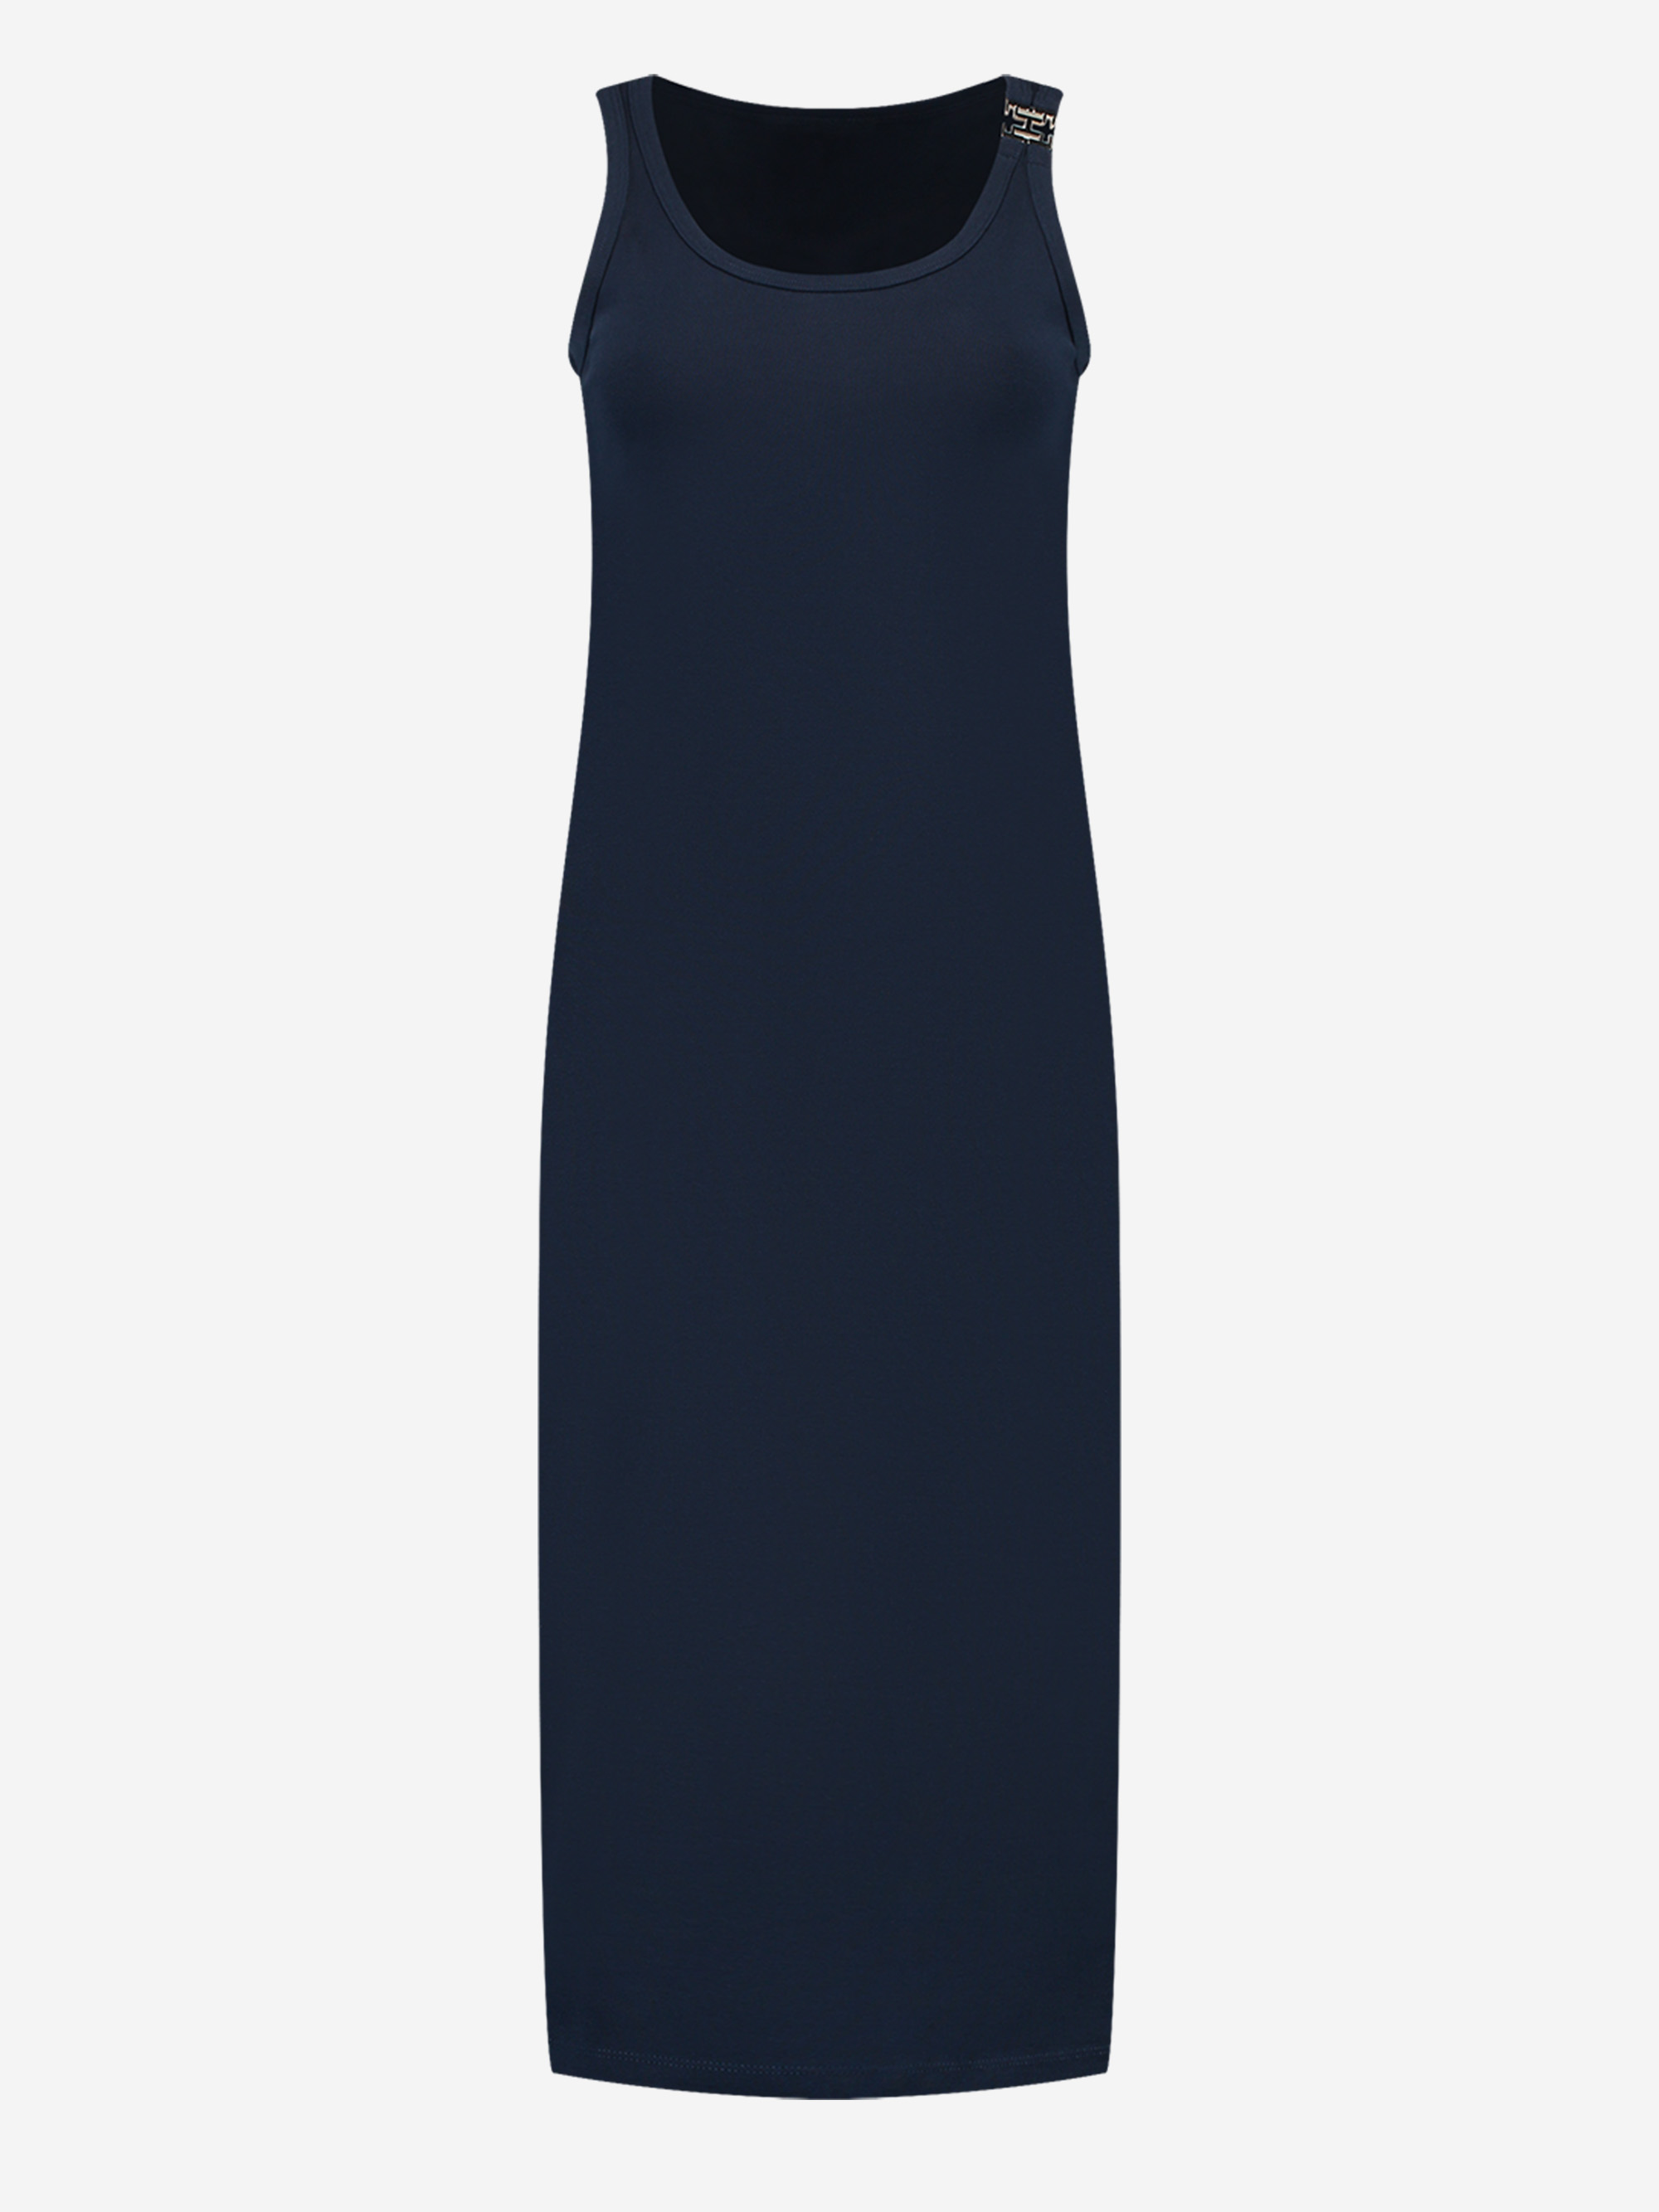 Fitted Tank dress 